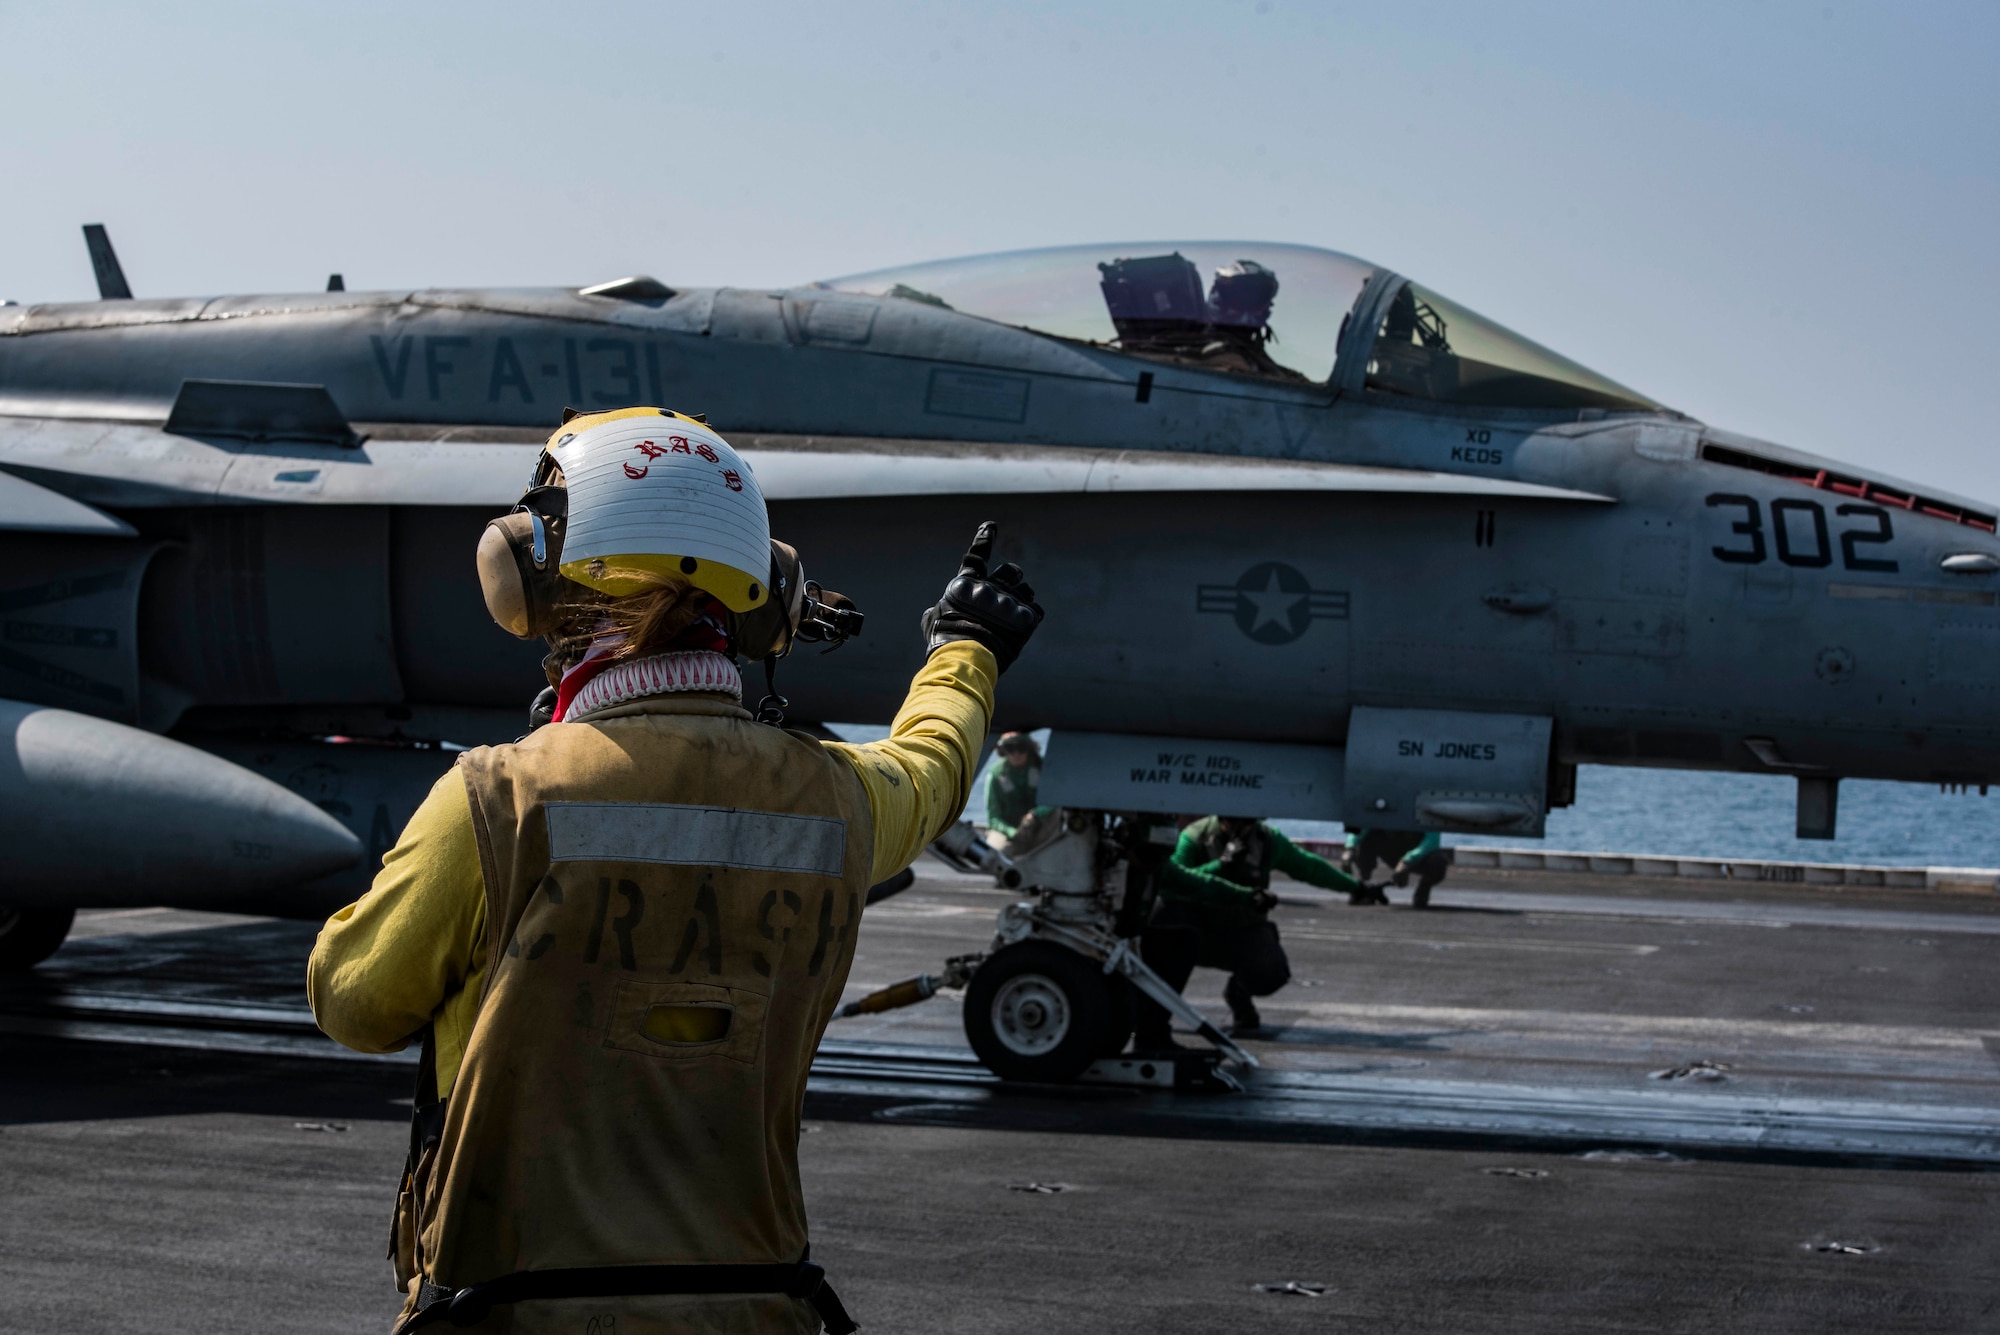 Petty Officer 3rd Class Gabrielle Embry signals to an F/A-18F Super Hornet, assigned to Strike Fighter Squadron (VFA) 131, on the flight deck of the aircraft carrier USS Dwight D. Eisenhower (CVN 69) (Ike). Embry serves as an aviation boatswain’s mate (handling) aboard Ike. Ike and its carrier strike group are deployed in support of Operation Inherent Resolve, maritime security operations and theater security cooperation efforts in the U.S. 5th Fleet area of operations. (U.S. Navy photo/Petty Officer 3rd Class Nathan T. Beard)